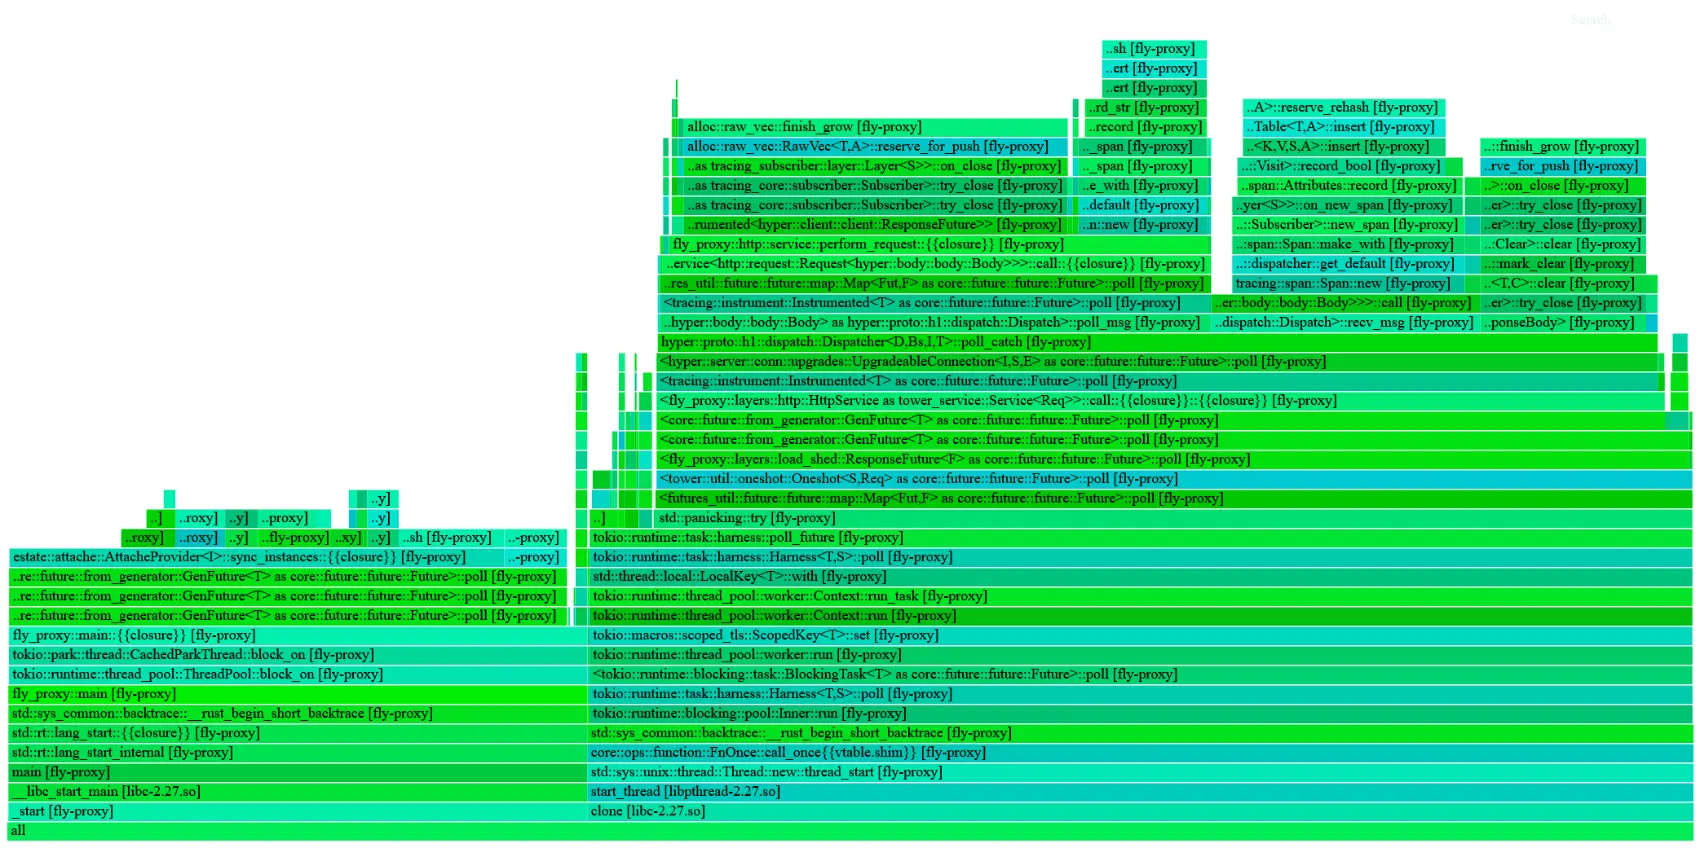 A flamegraph, that looks very different from the other one. The largest block goes through the regular tokio machinery, a tower Service::call, some tracing-subscriber stuff, and the very top (actually the leafs) are functions like "alloc::raw_vec::finish_grow" or "reserve_rehash"